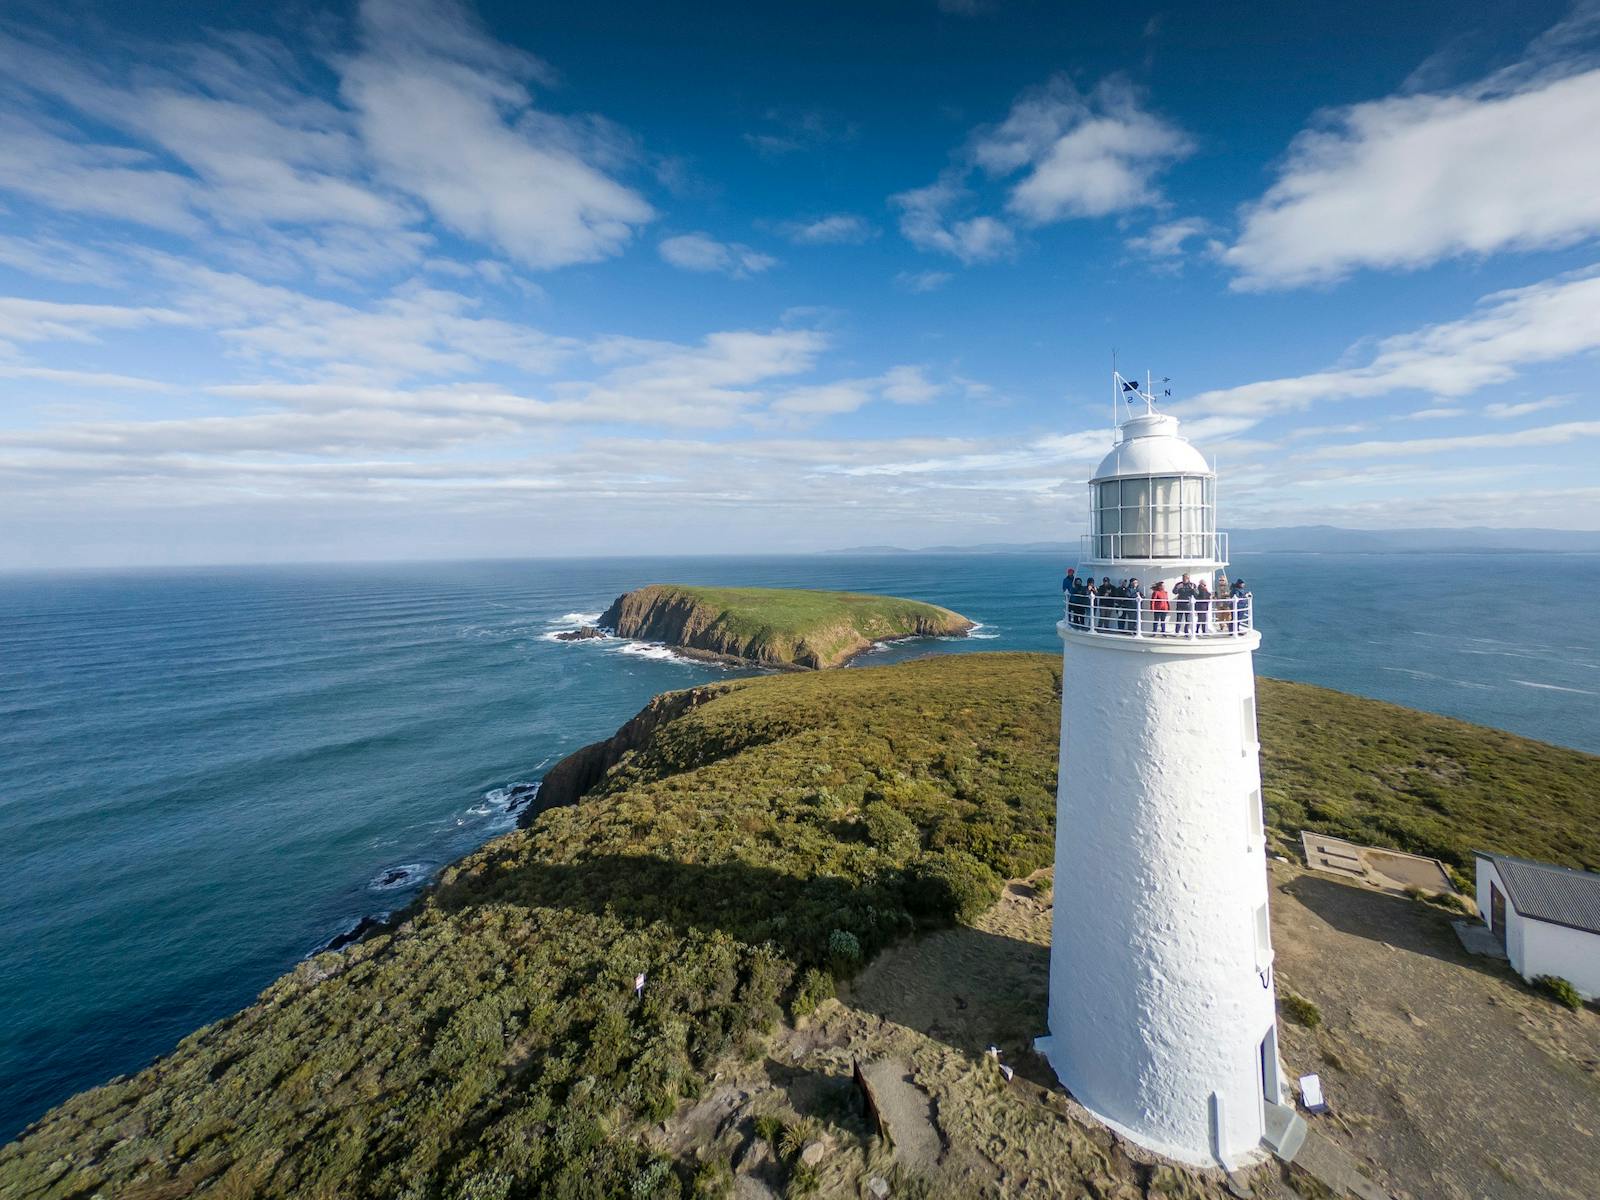 The views and history at Cape Bruny are mind blowing